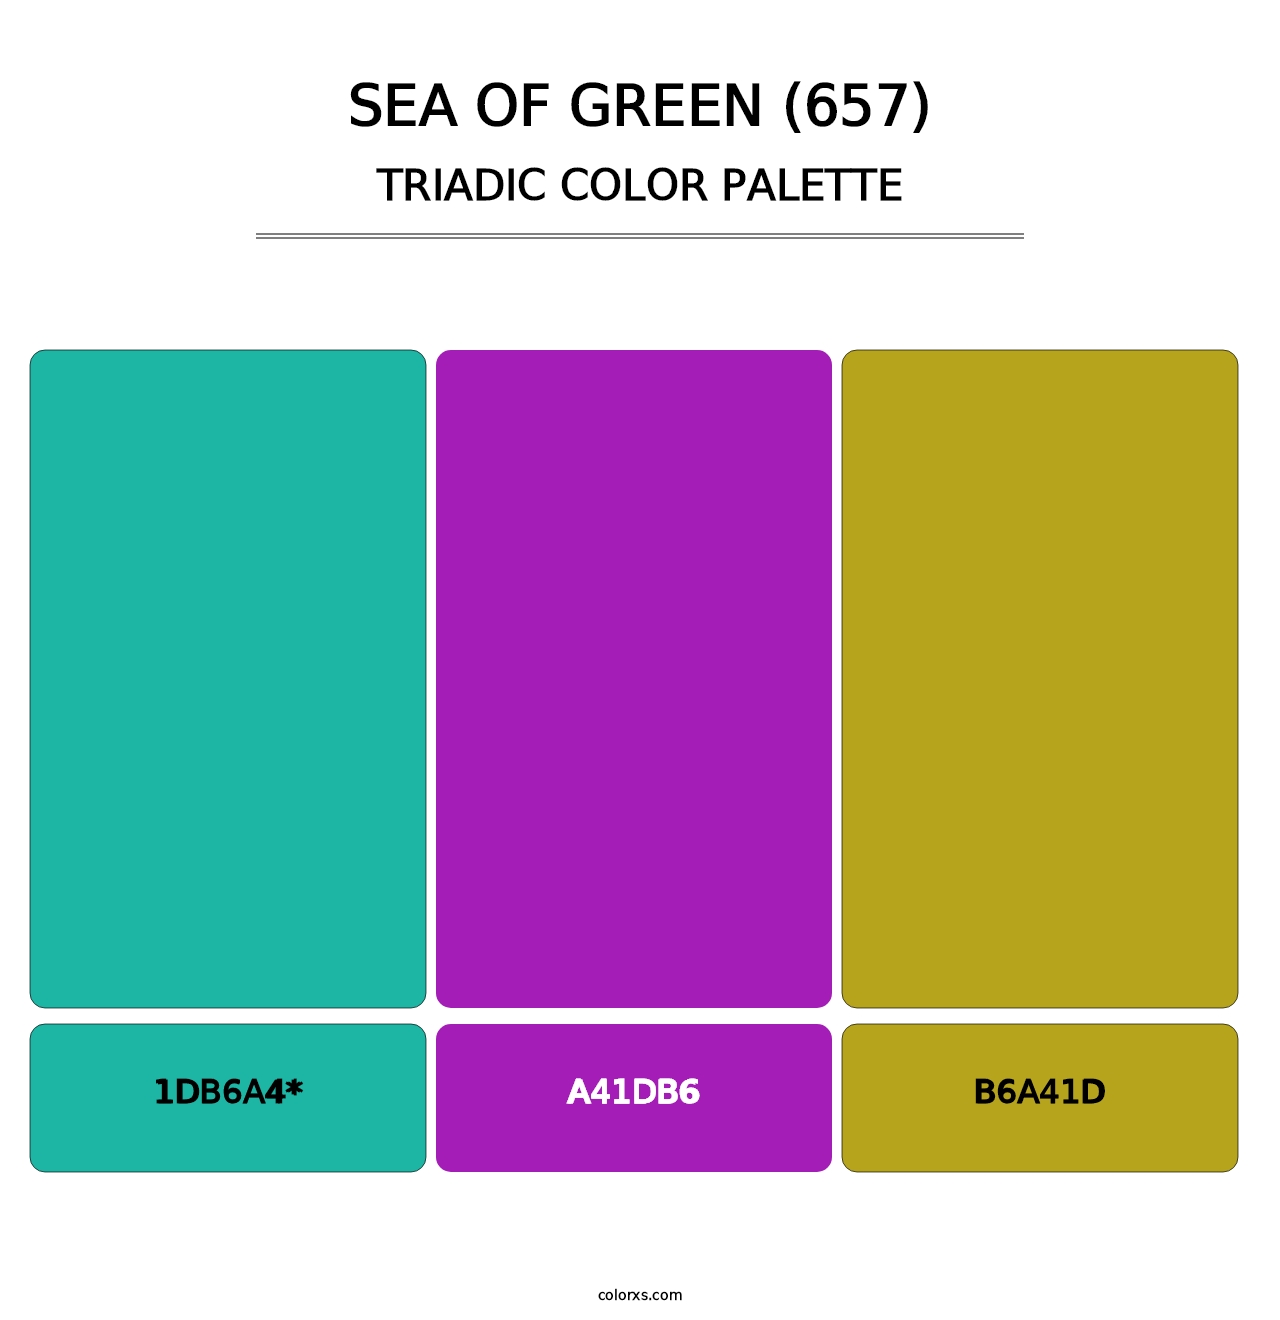 Sea of Green (657) - Triadic Color Palette